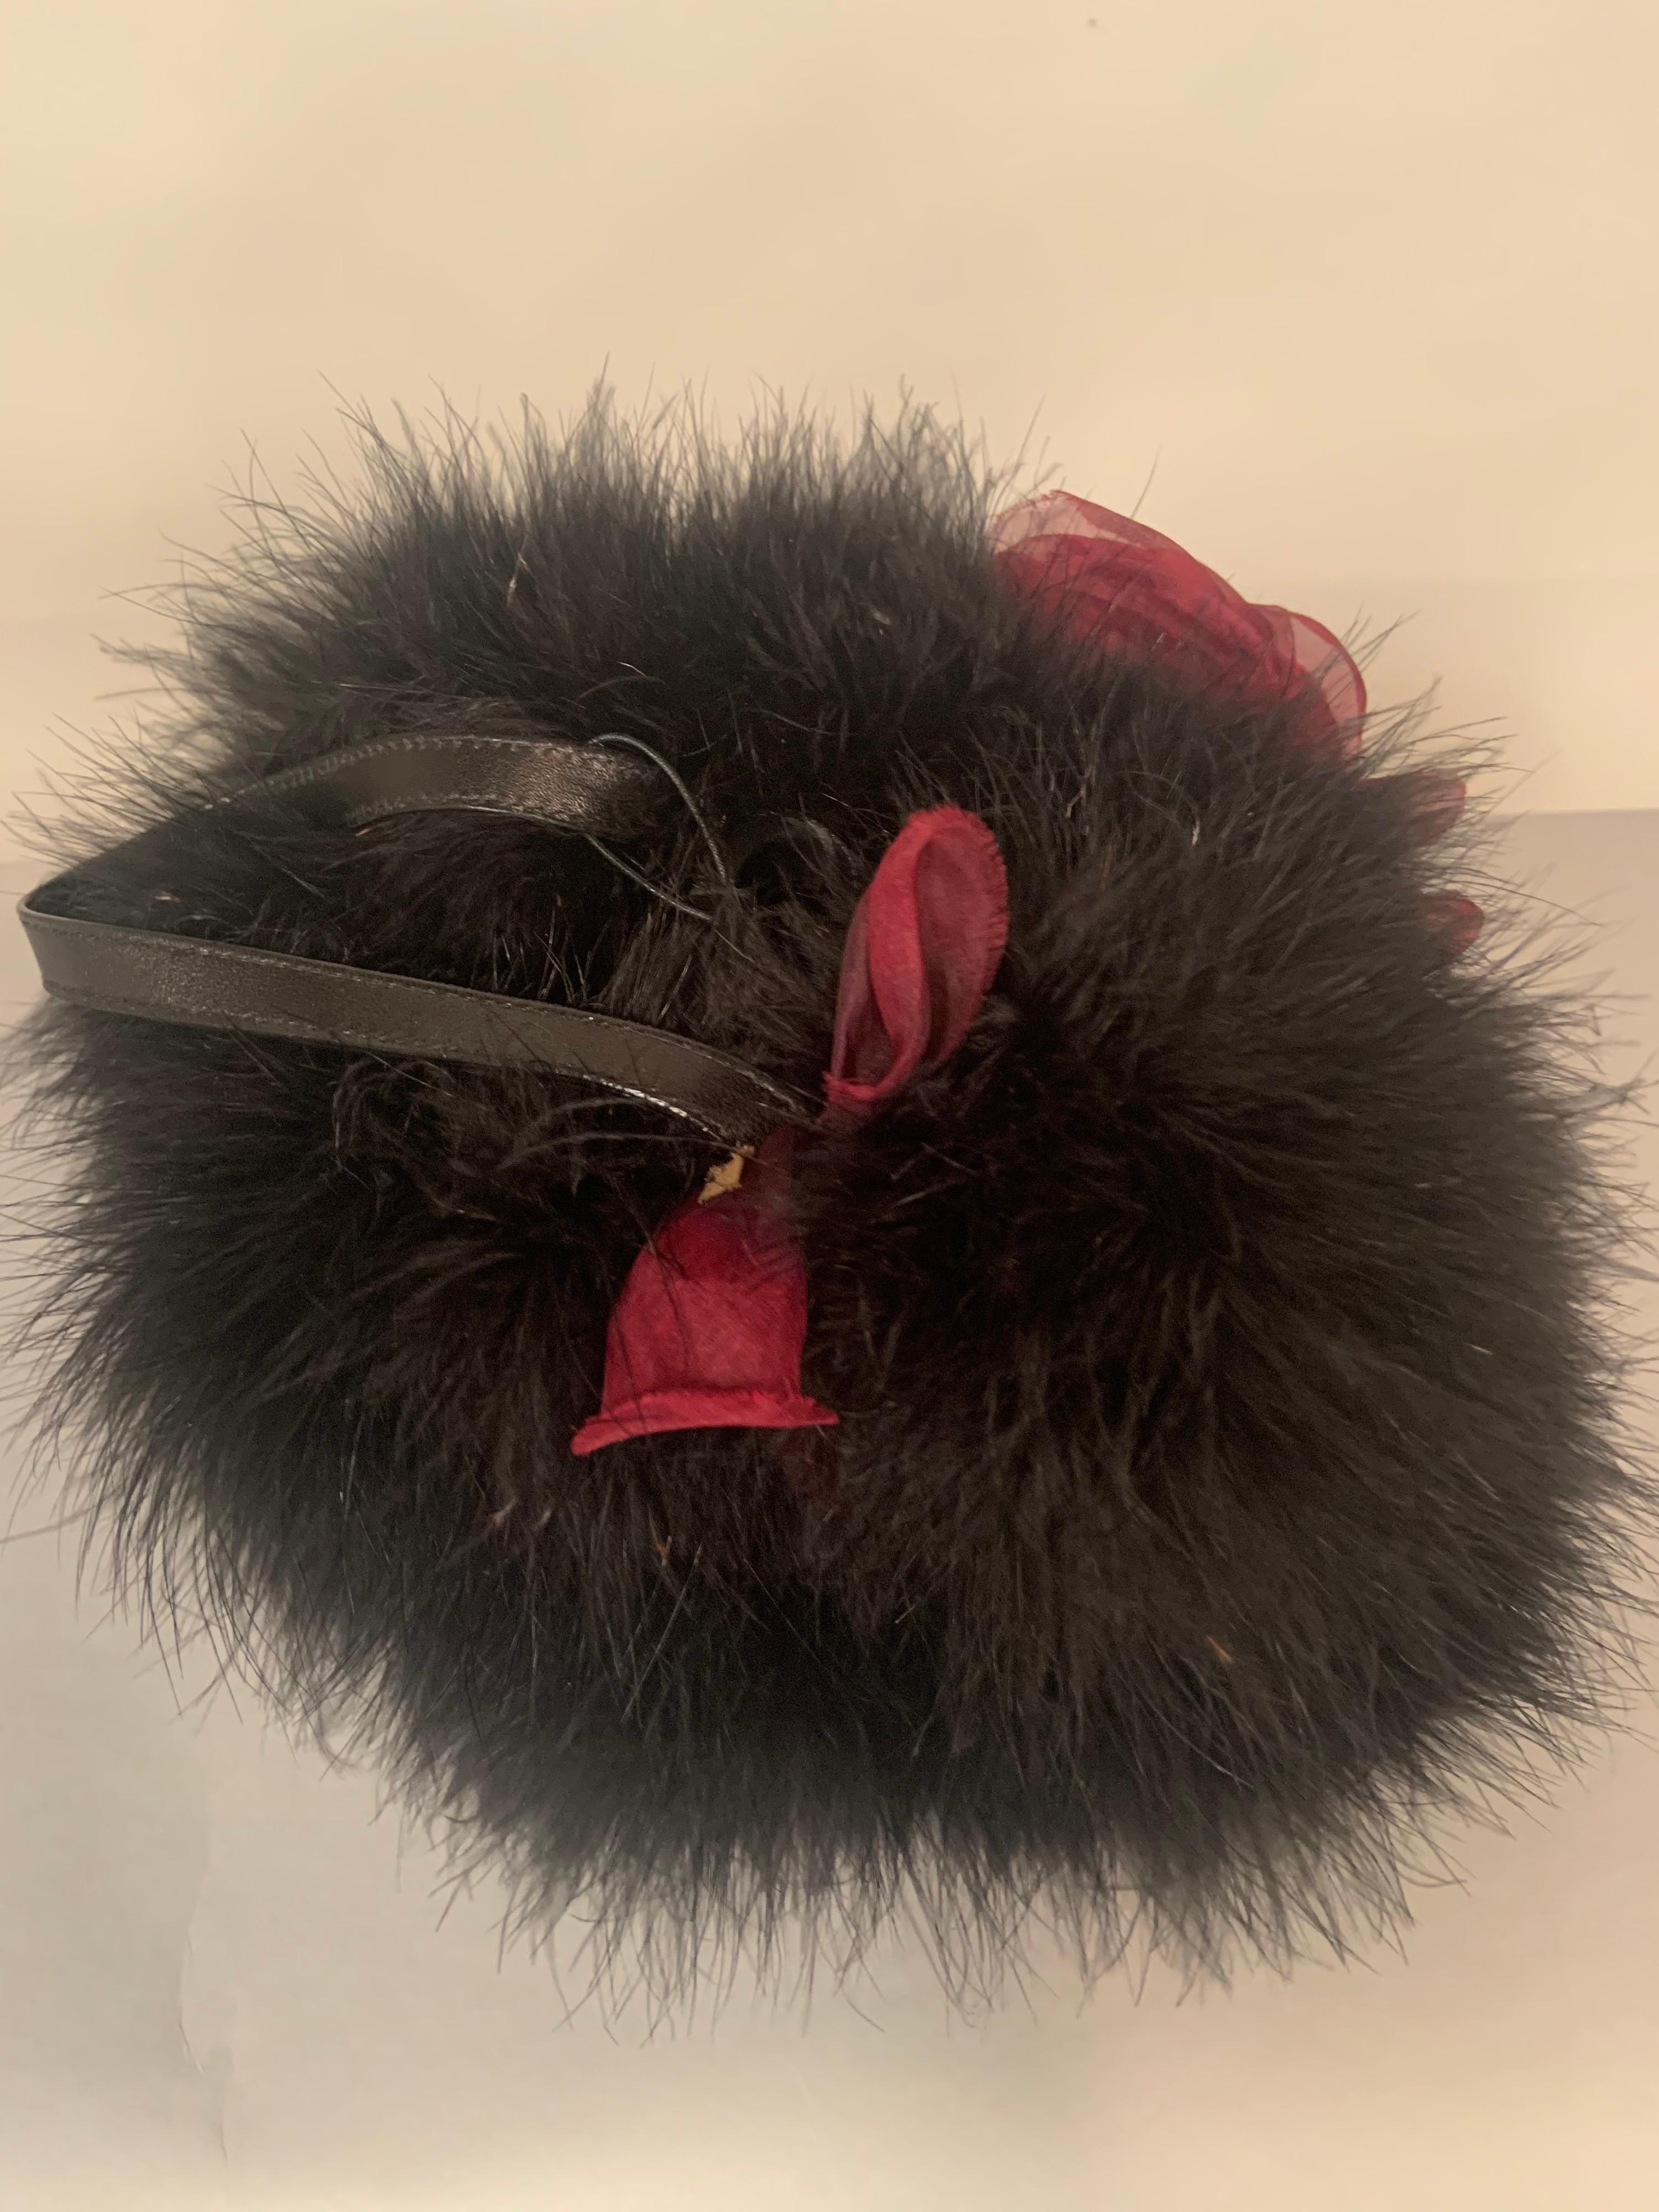 This witty Italian handbag from Desmo is crafted from marabou feathers, lined with silk chiffon and trimmed with two large claret colored roses. The bag has a black leather strap handle and an oval black leather bottom.  It has never been used,